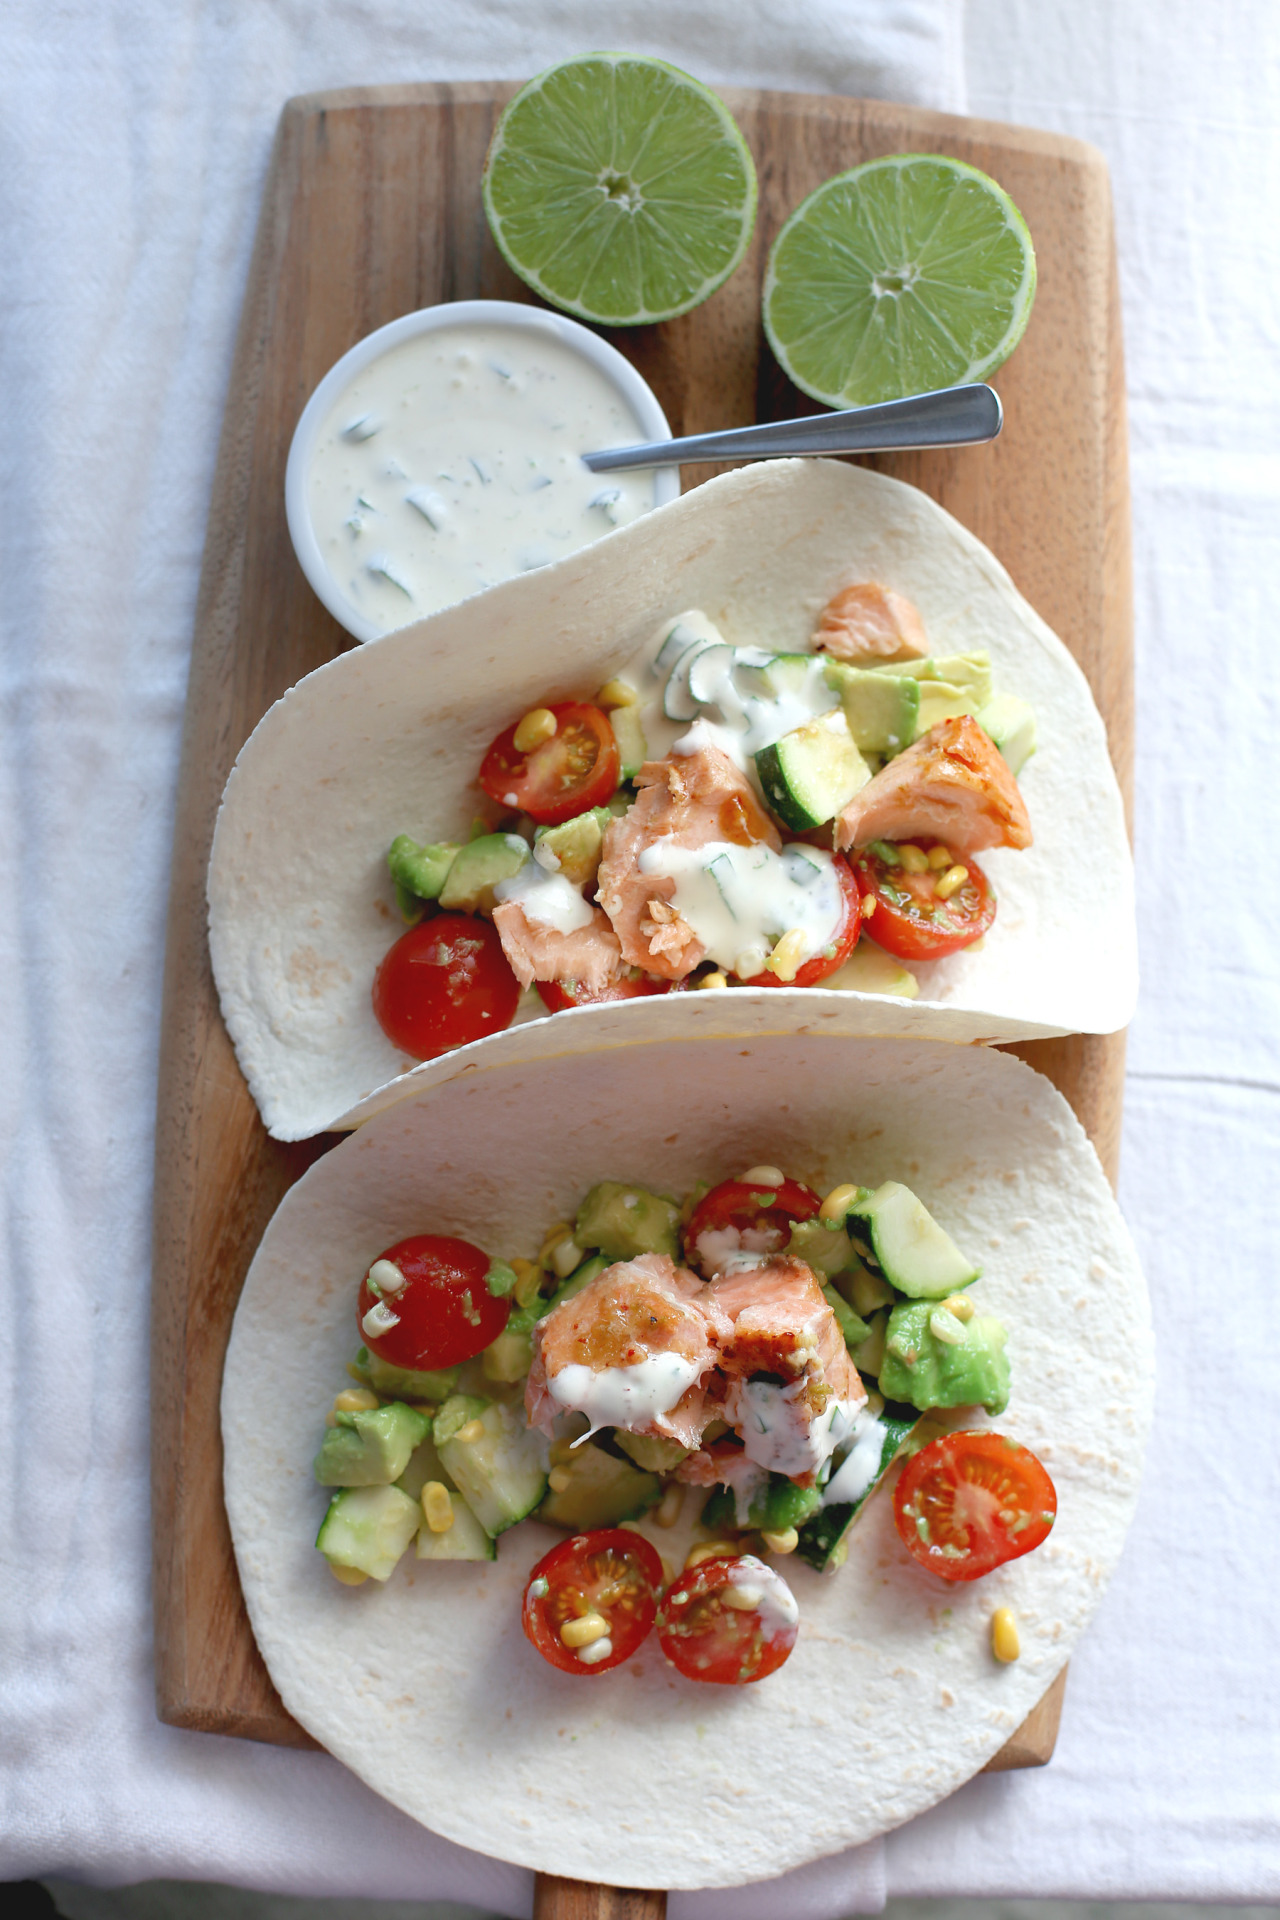 Spicy Salmon Soft Tacos with Avocado, Cherry Tomato, and Corn Salsa